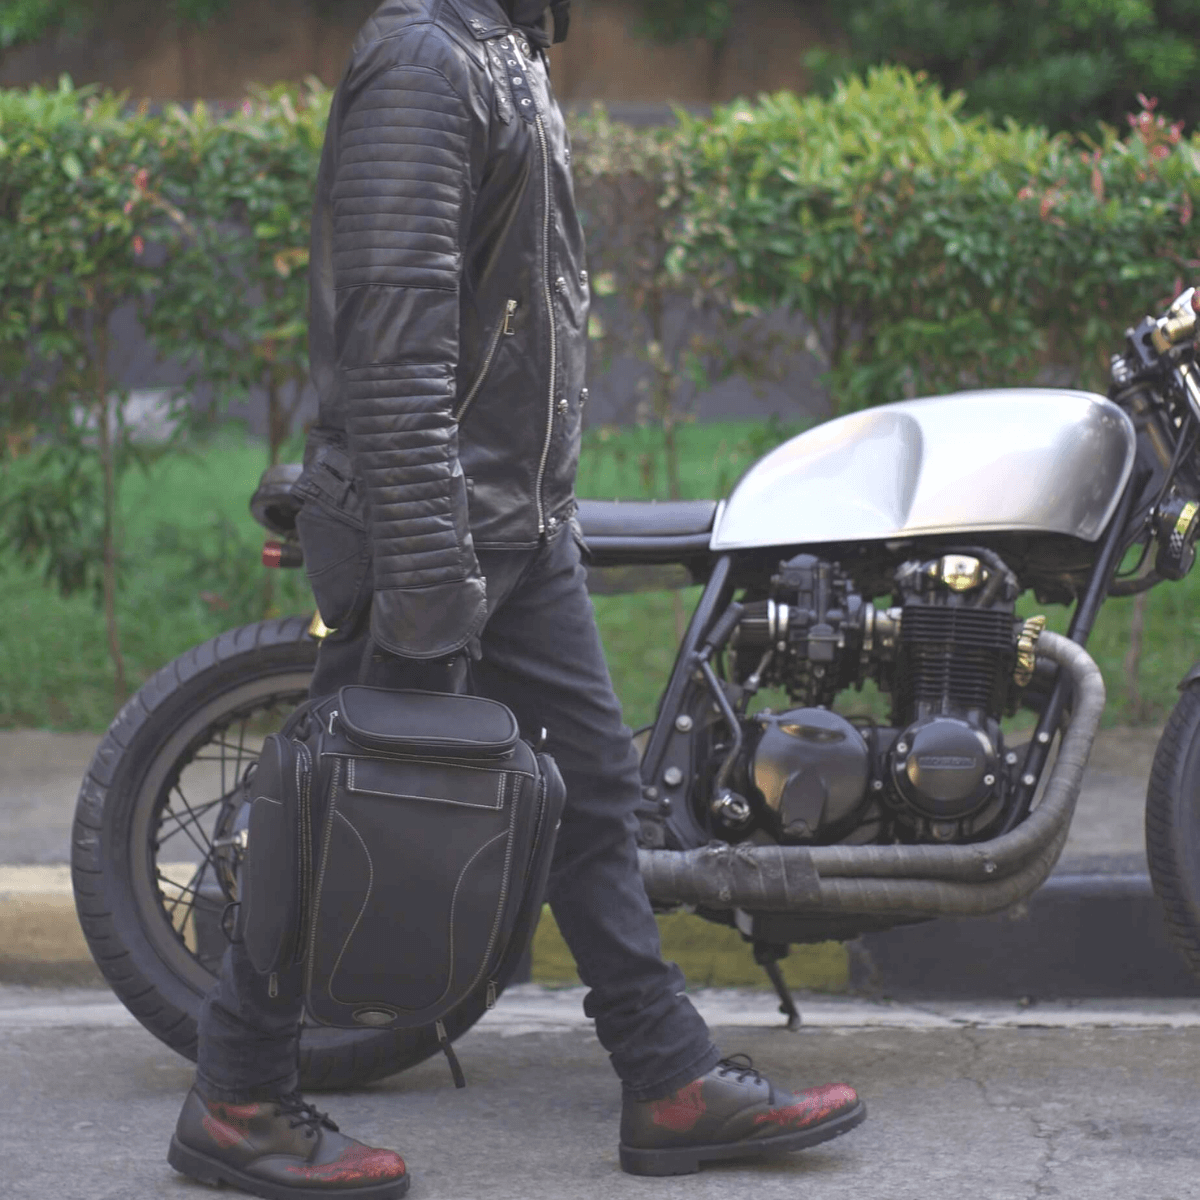 The man is wearing a Universal Motorcycle Retro Tail Bag with Waterproof Cover.